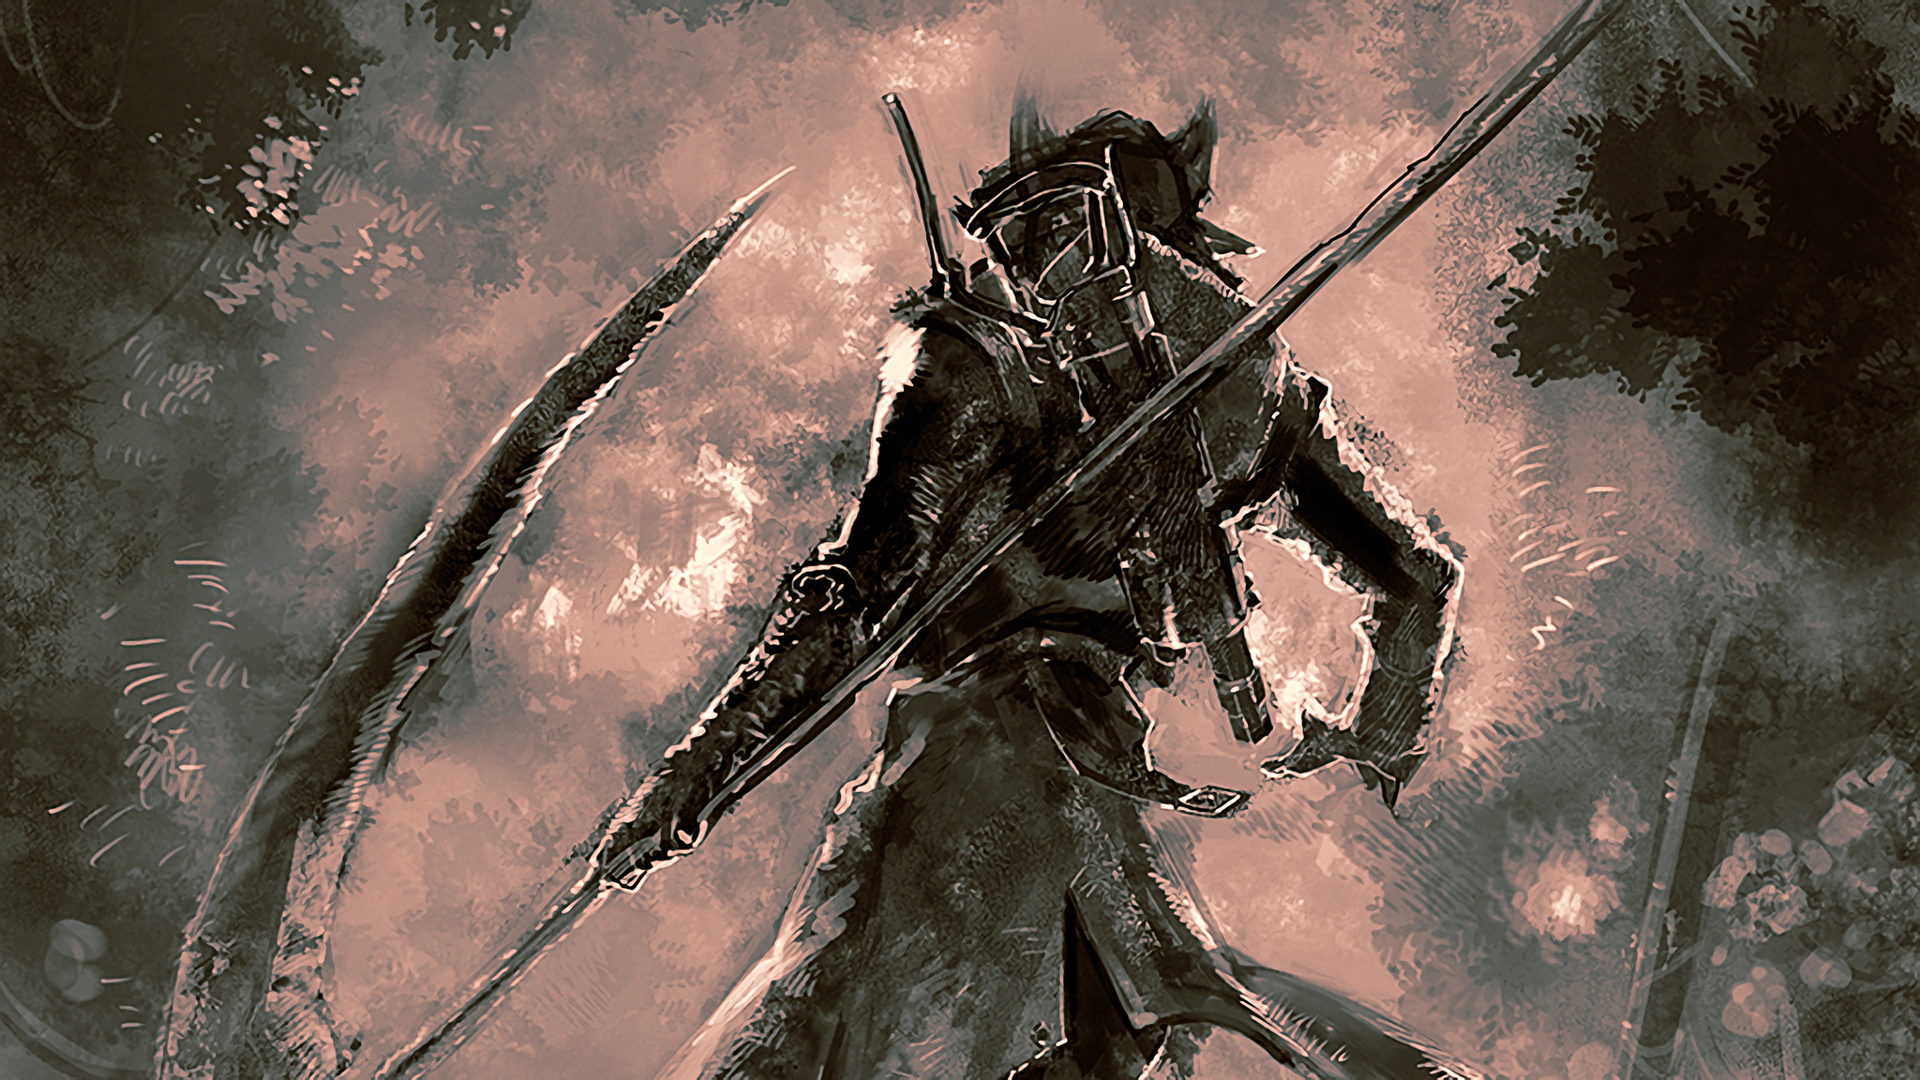 bloodborne, video game, shadow of the colossus lock screen backgrounds